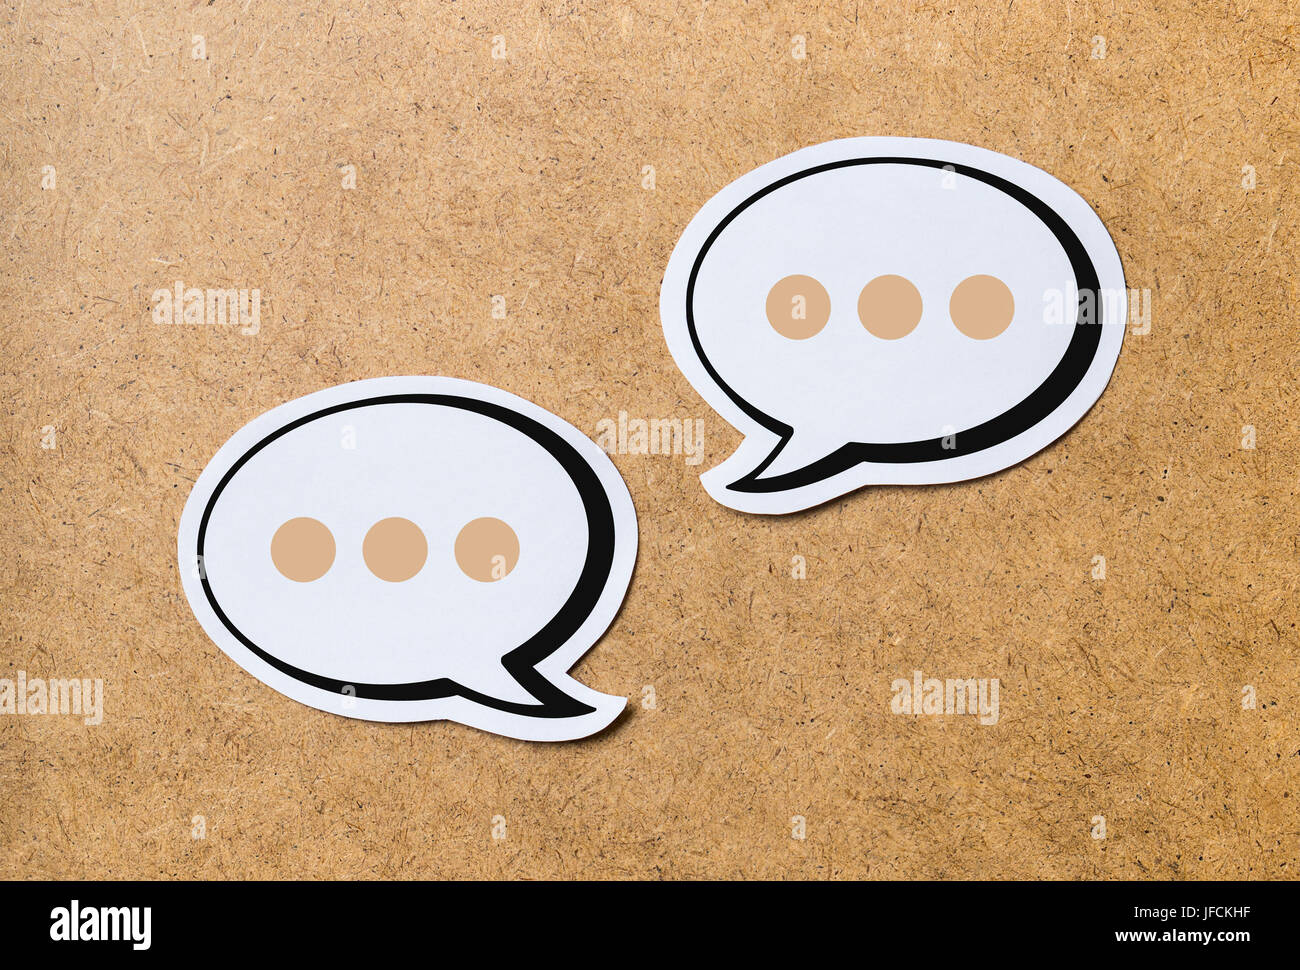 2 speech bubbles on a light brown wooden cork board background. Chat bubble and icon cut from paper and cardboard. Discussion, chat and commenting. Stock Photo